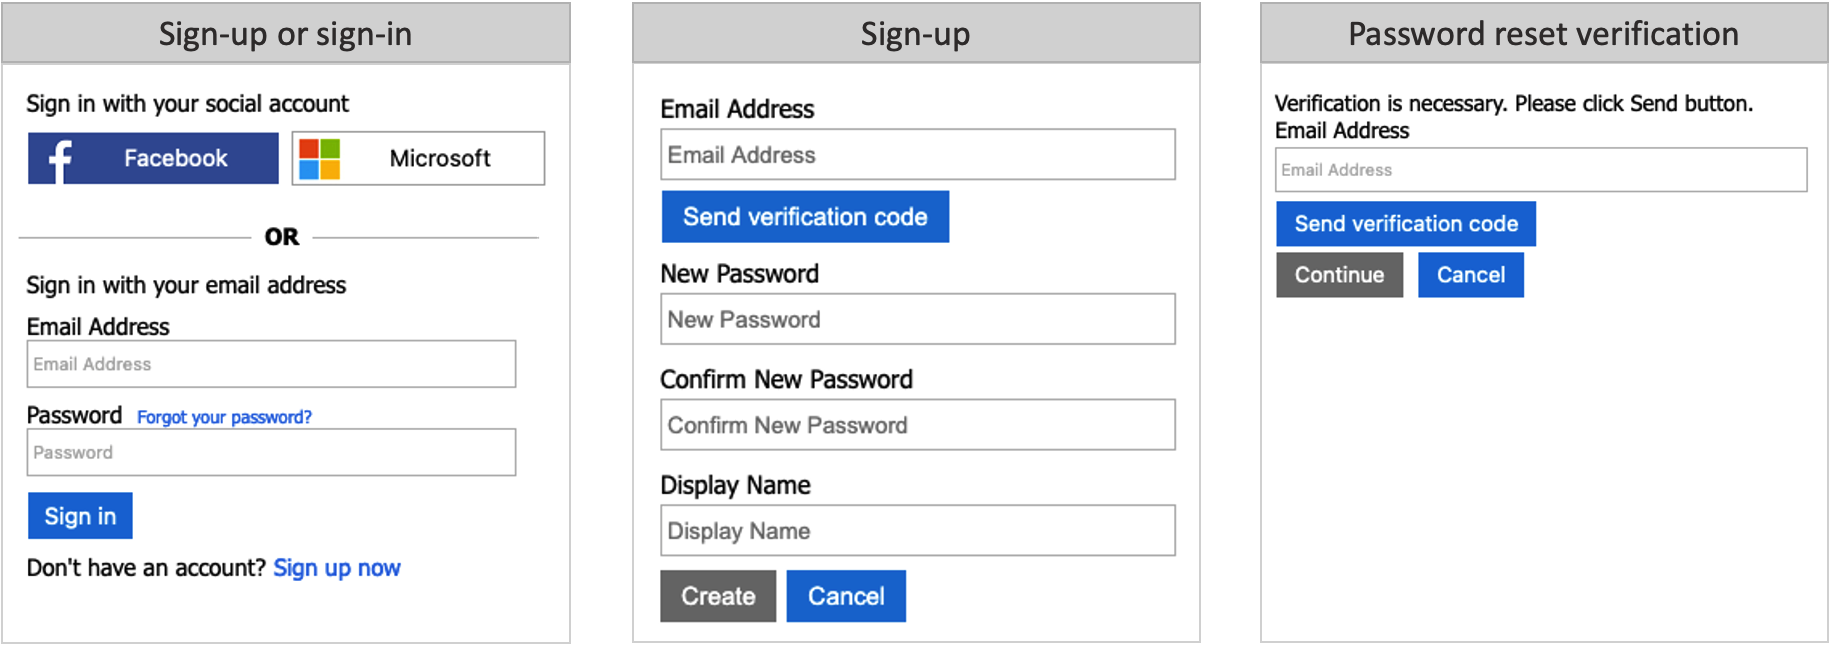 Series of screenshots showing email sign-up or sign-in experience.